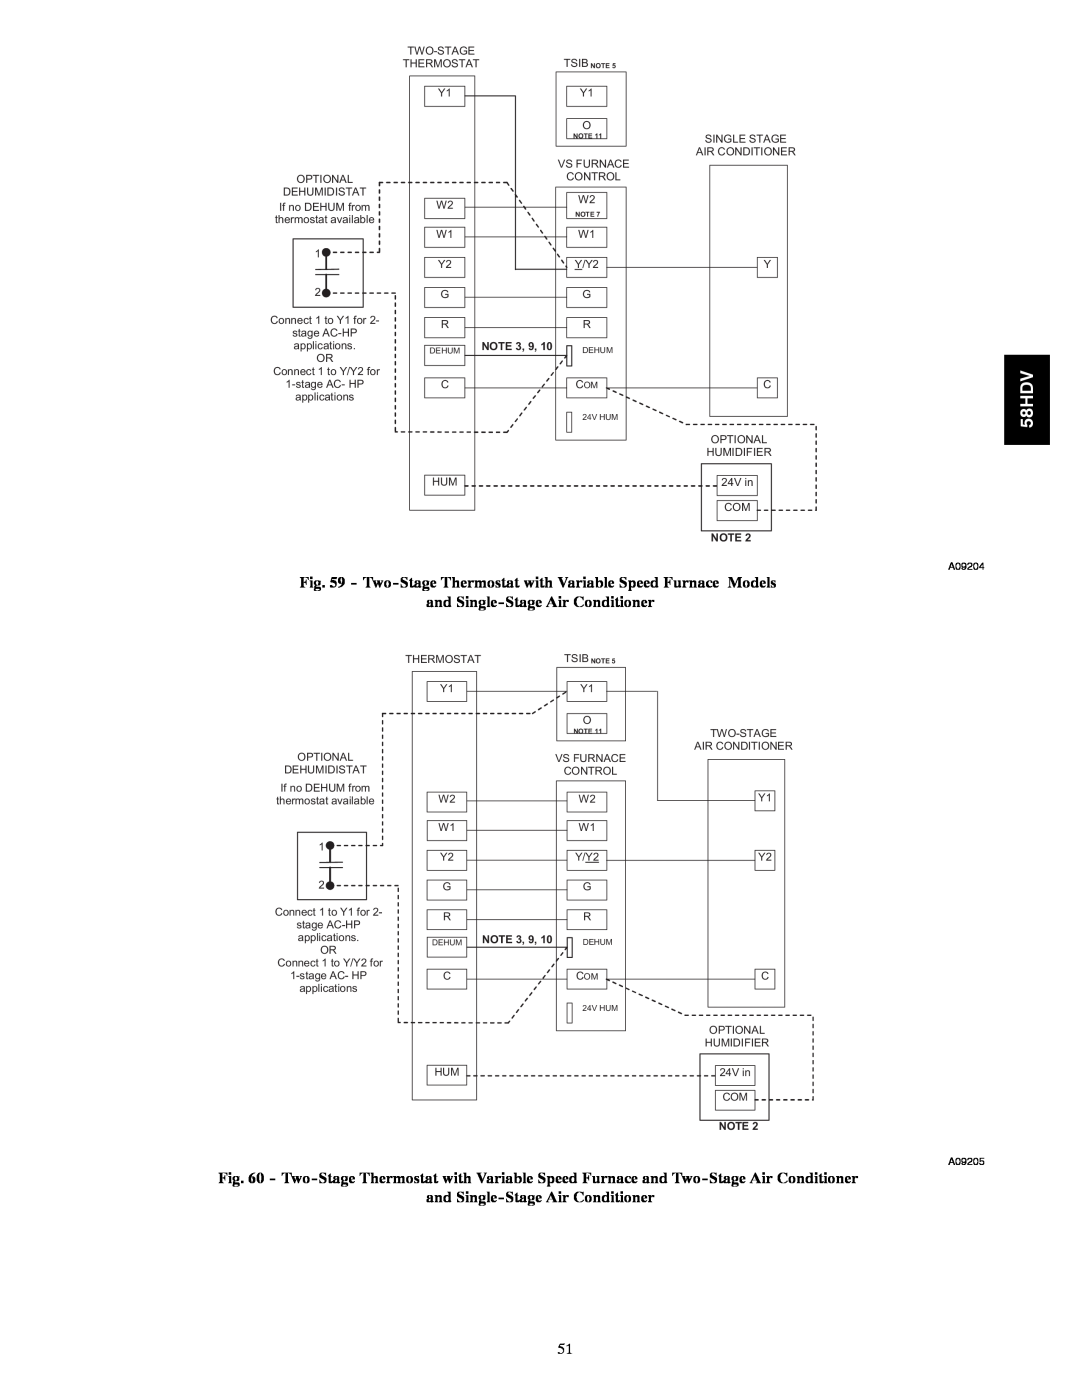 Carrier 58HDV installation instructions and Single-StageAir Conditioner, NOTE 3 